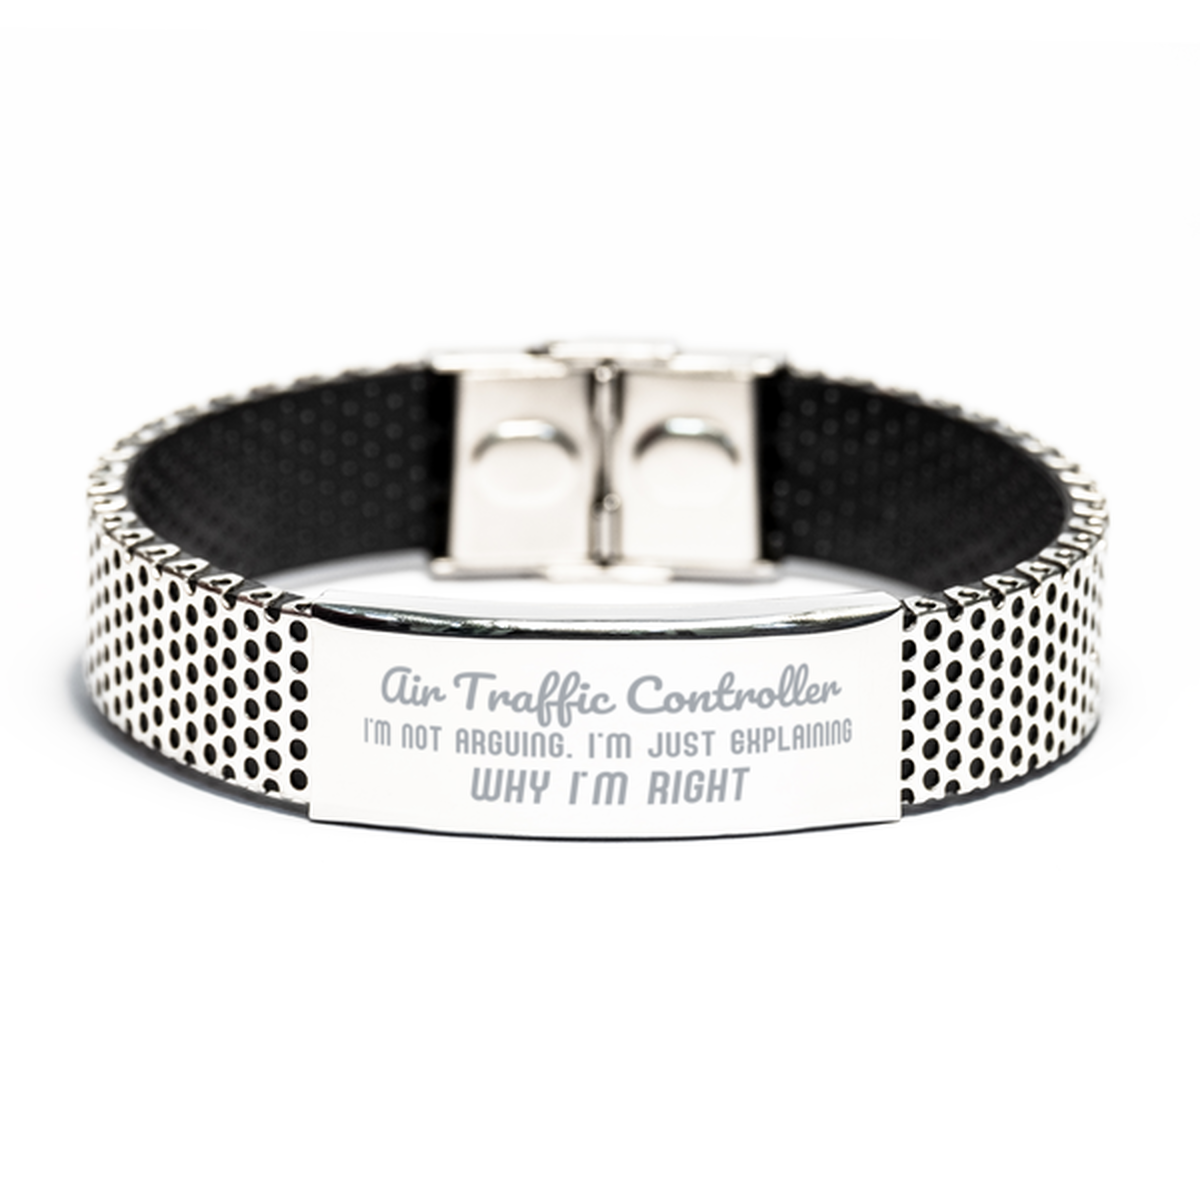 Air Traffic Controller I'm not Arguing. I'm Just Explaining Why I'm RIGHT Stainless Steel Bracelet, Funny Saying Quote Air Traffic Controller Gifts For Air Traffic Controller Graduation Birthday Christmas Gifts for Men Women Coworker